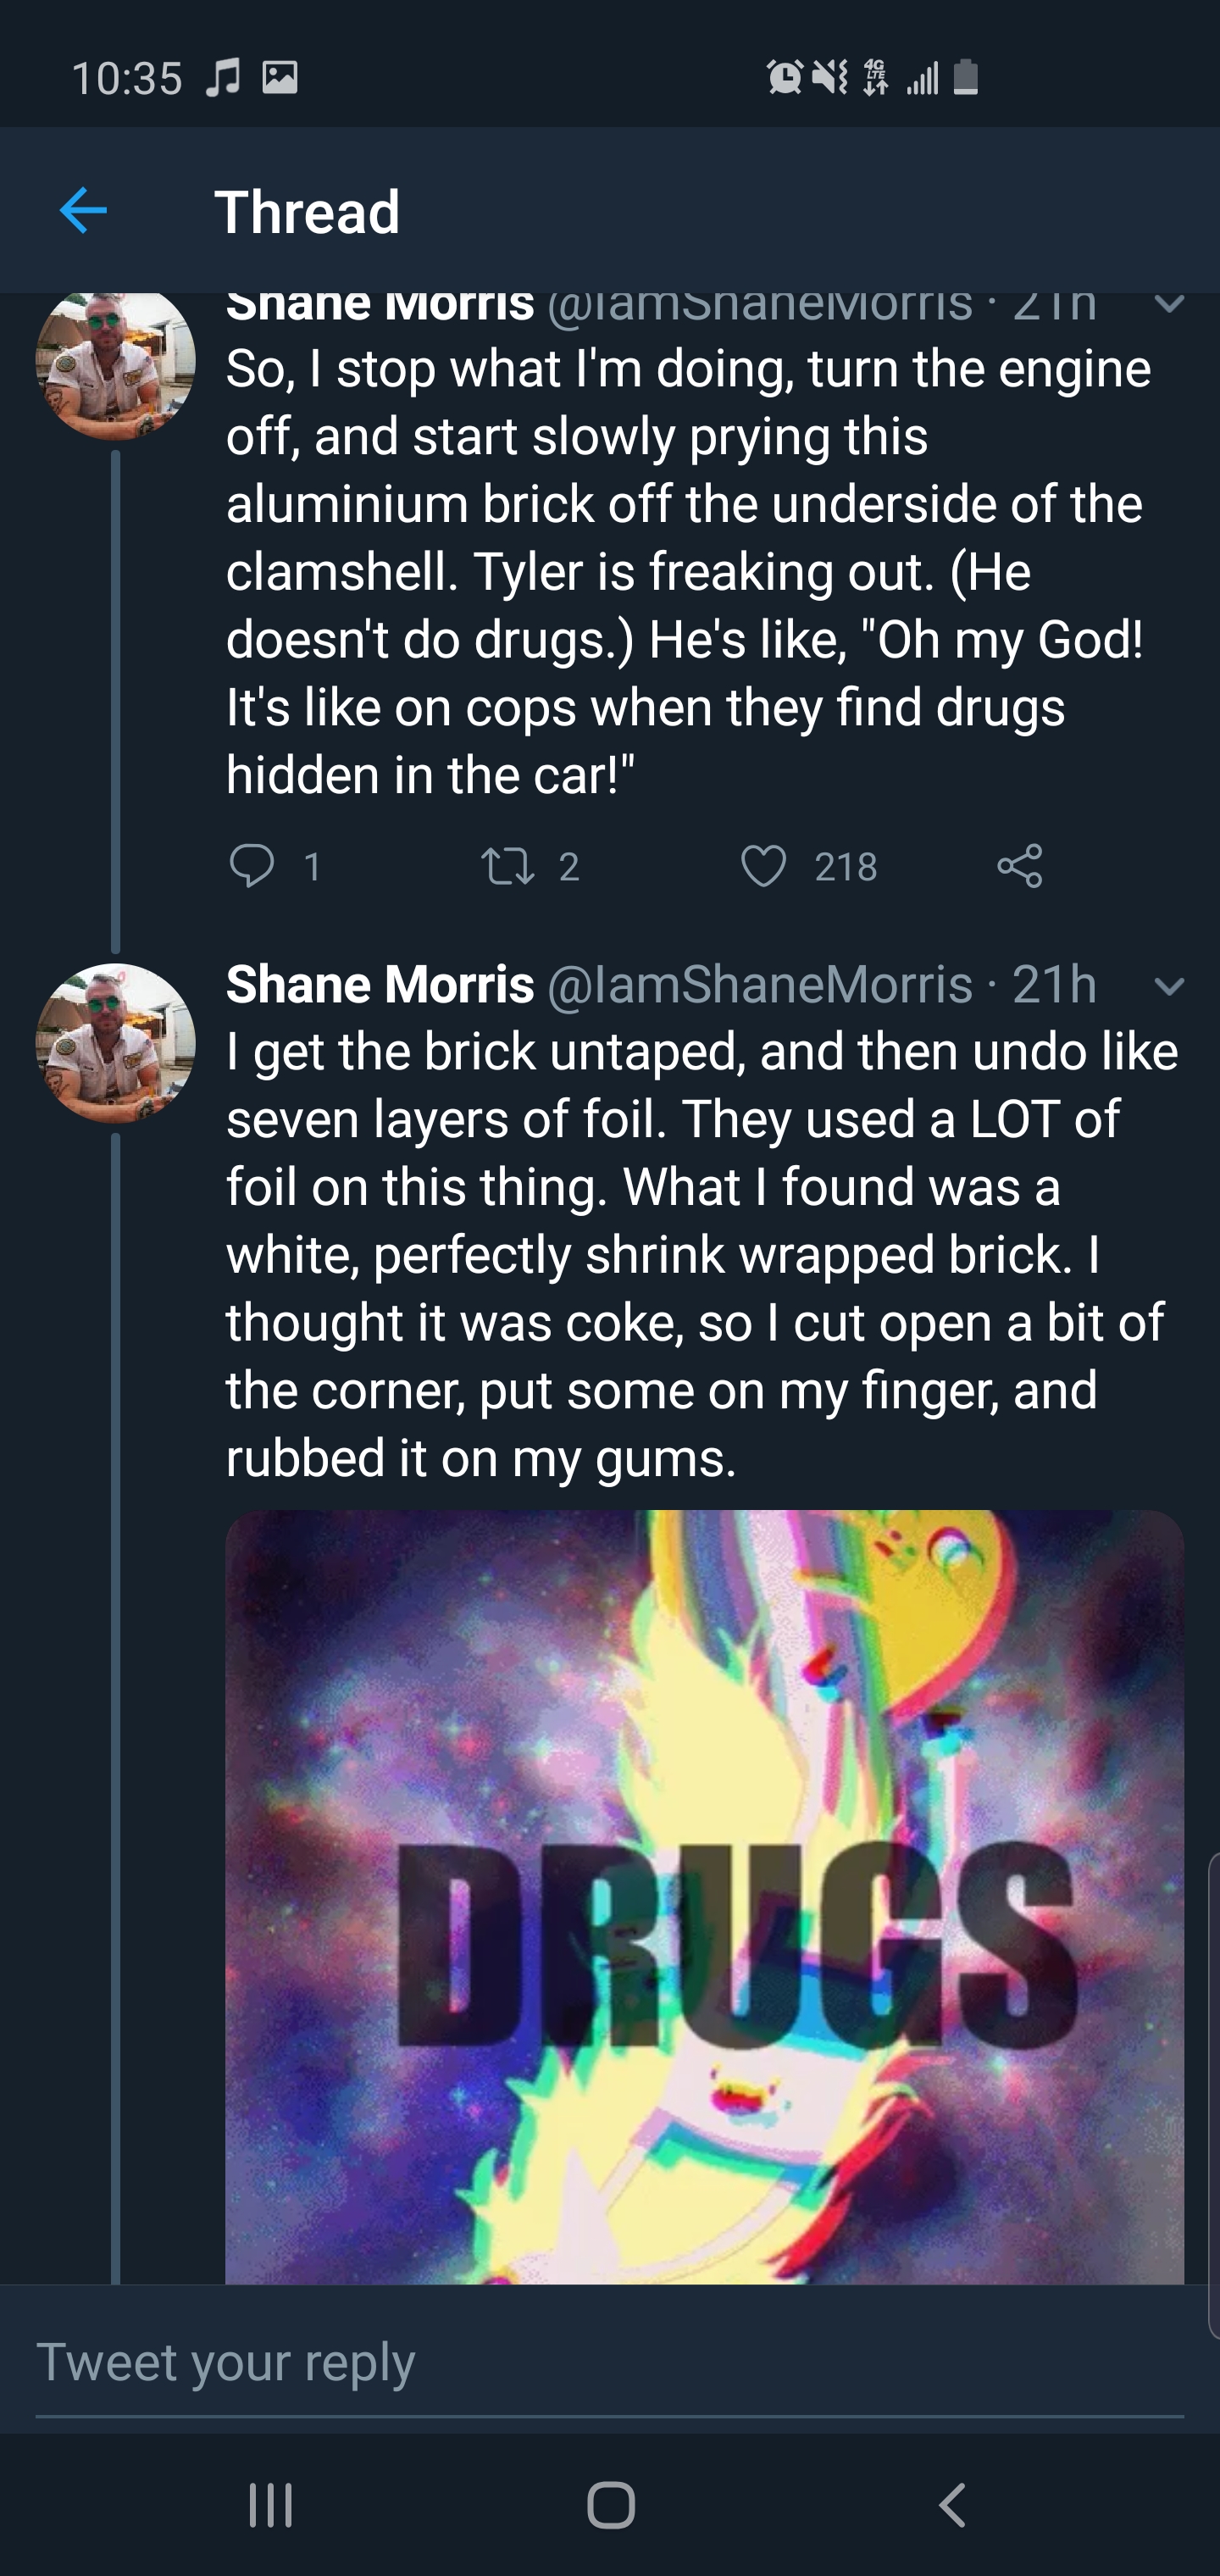 screenshot - 29 Ou Thread snane Morriscamsnanevoms in So, I stop what I'm doing, turn the engine off, and start slowly prying this aluminium brick off the underside of the clamshell. Tyler is freaking out. He doesn't do drugs. He's , "Oh my God! It's on c